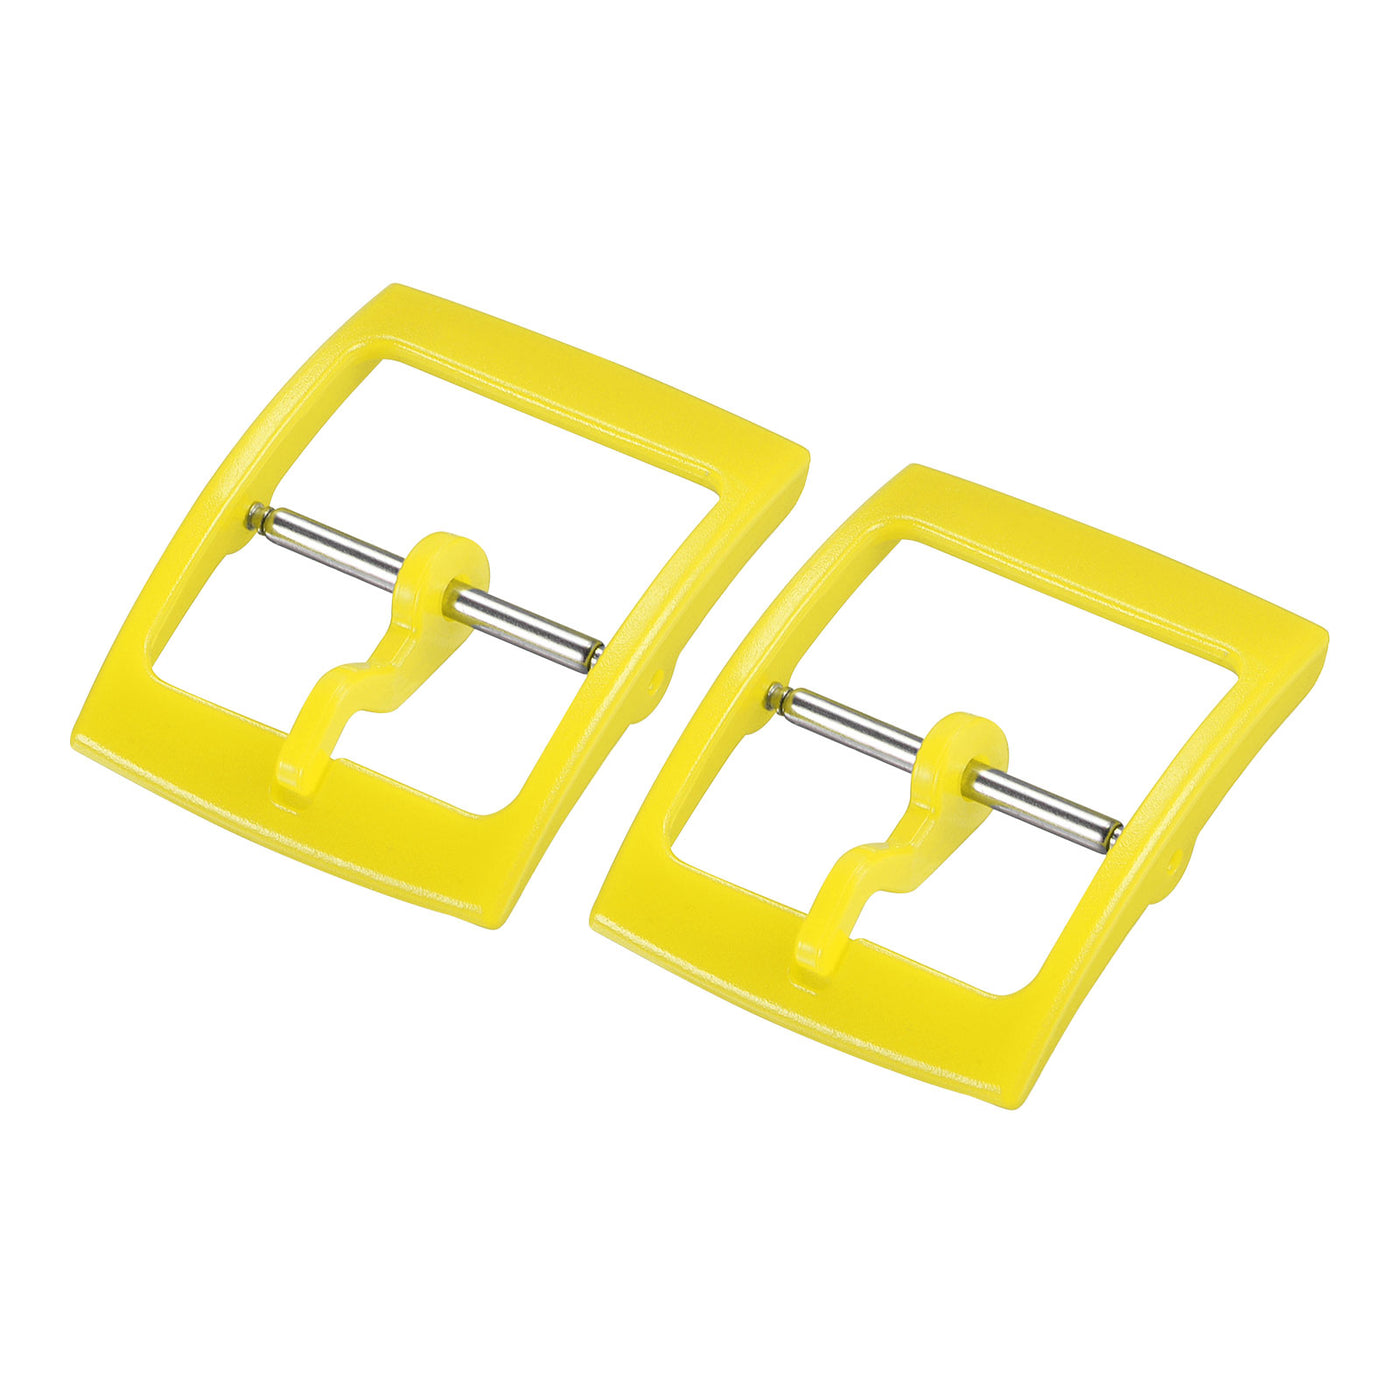 Uxcell Uxcell Watch Strap Clasp Plastic Buckle for 16mm Width Watch Bands Yellow 2 Pcs